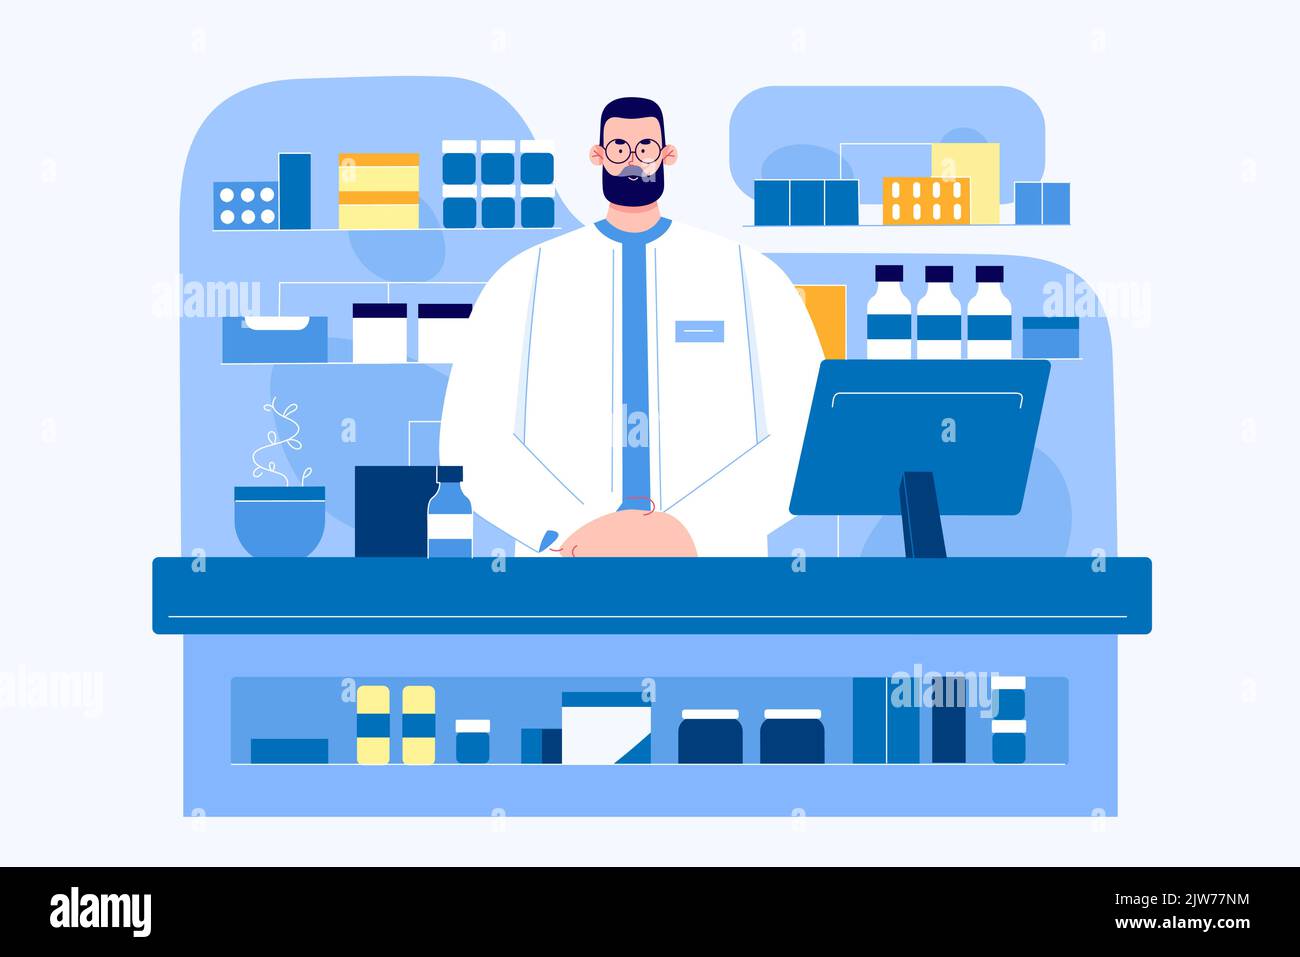 Pharmacy store with pharmacist standing at drugstore counter vector illustration. Cartoon man selling pills in modern medical shop interior with medications, vitamins and drugs on shelves and computer Stock Vector